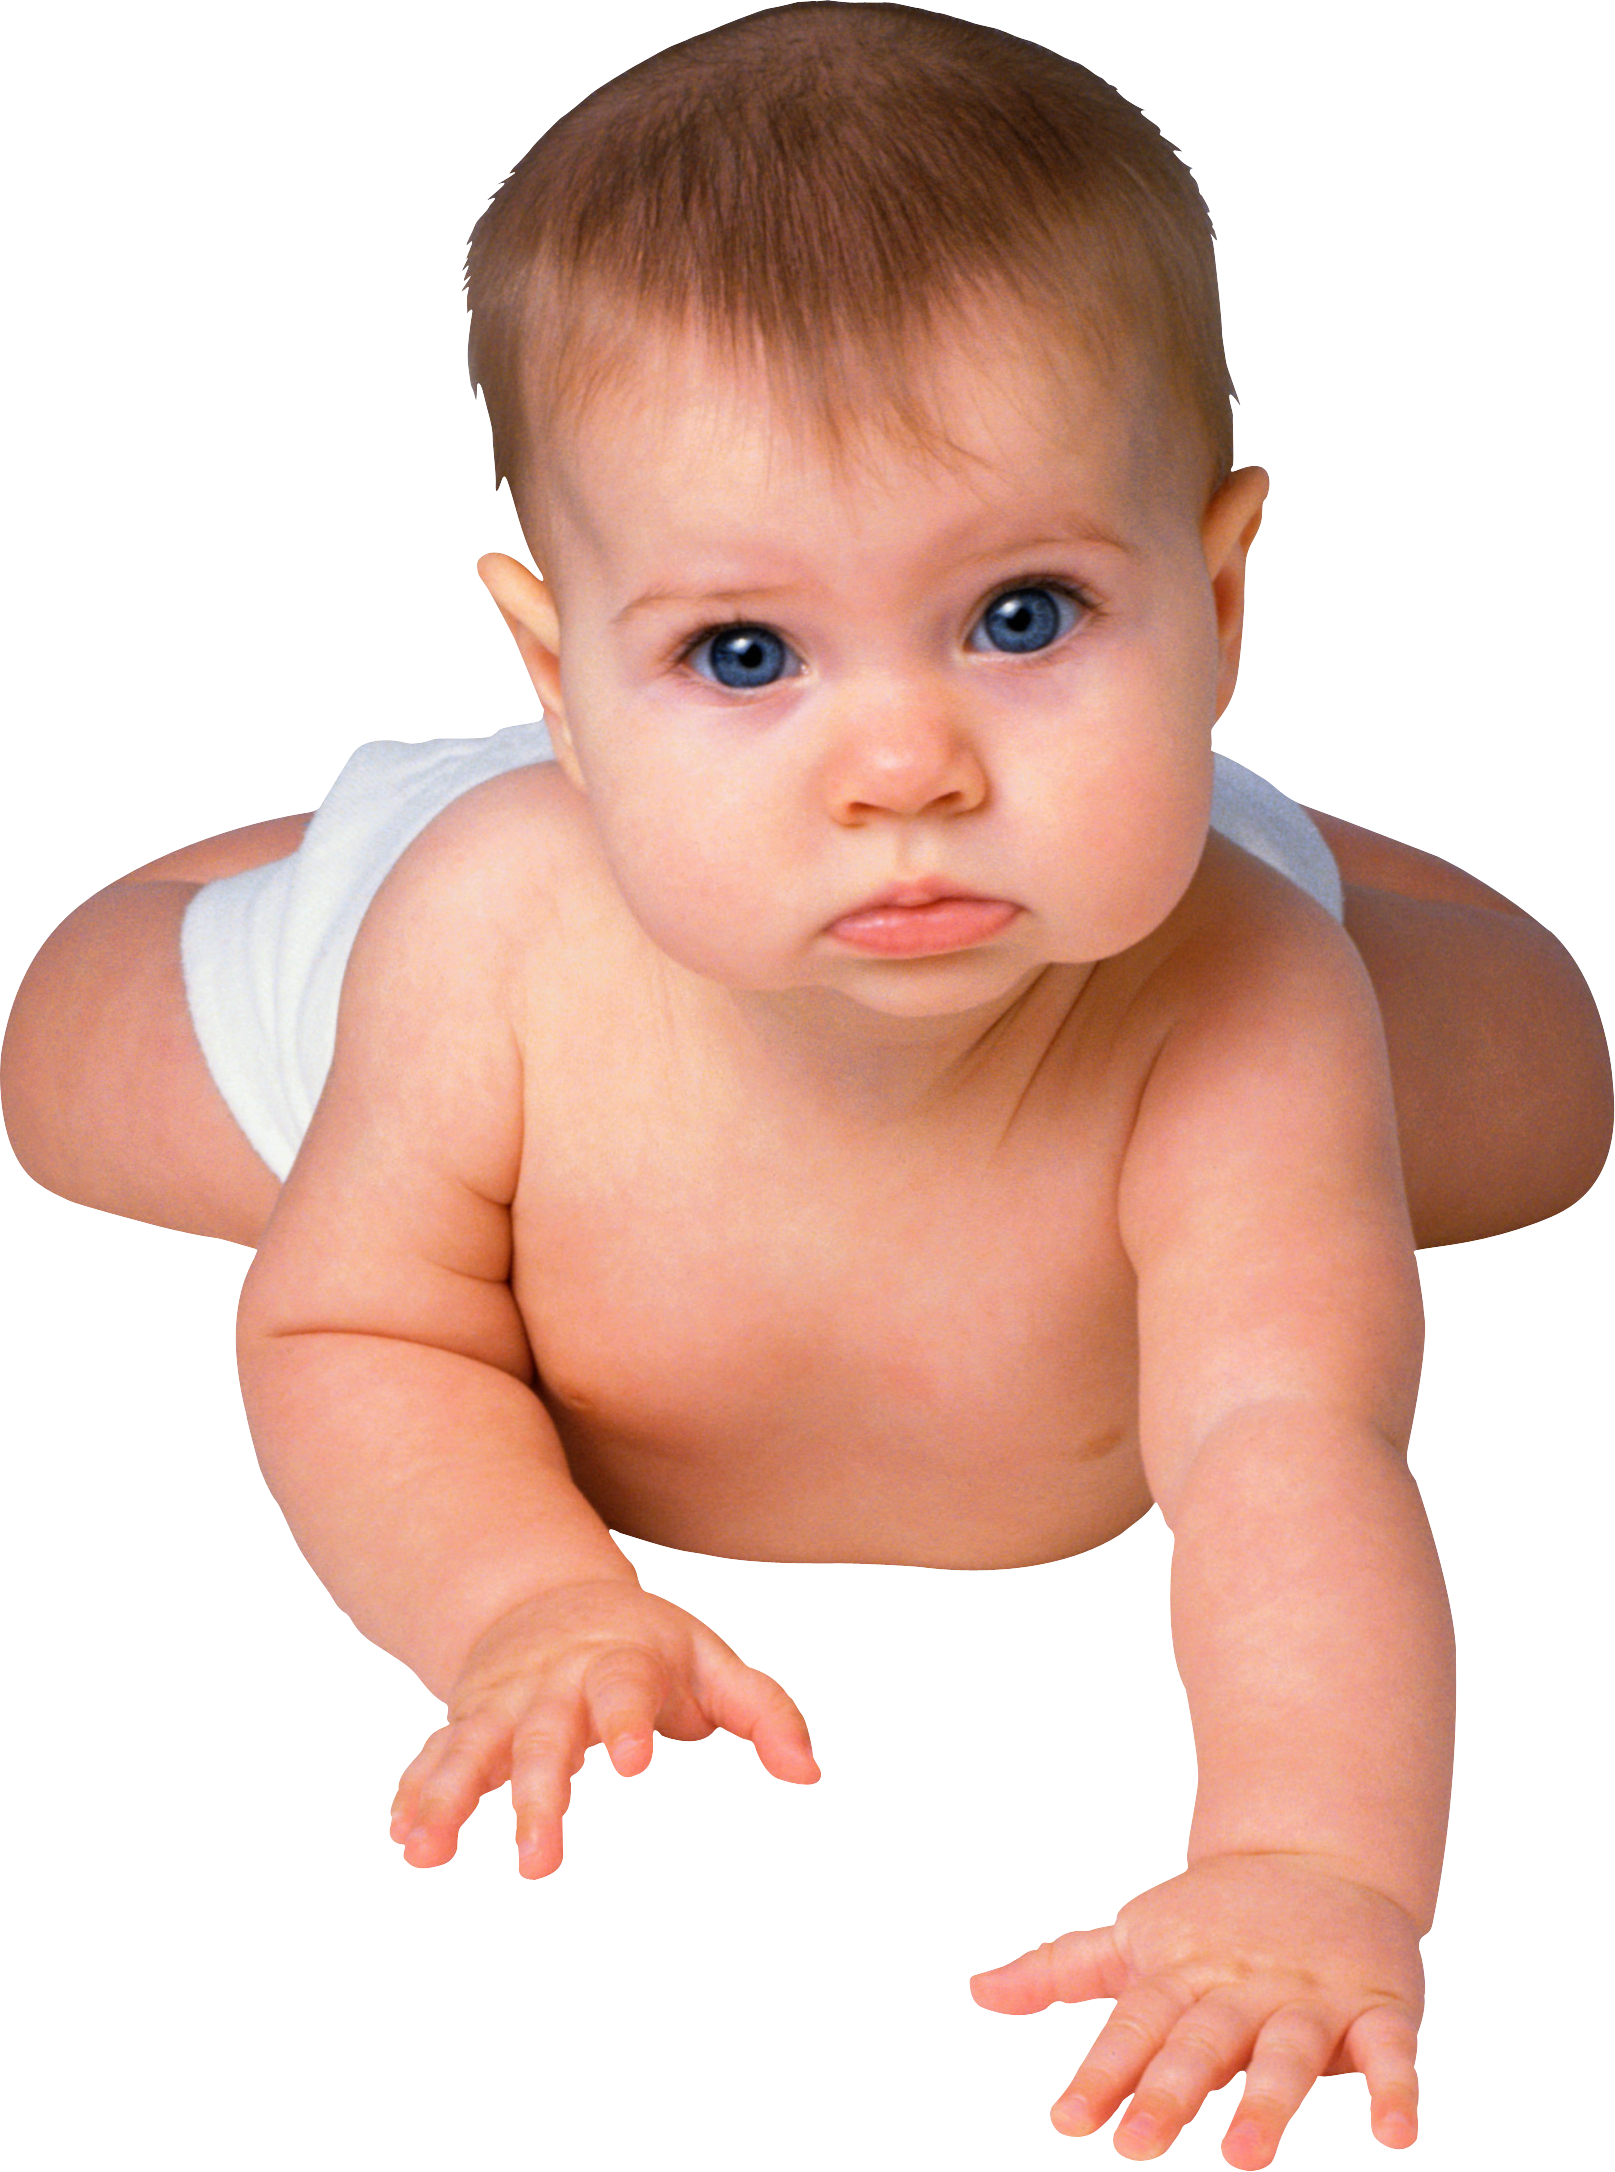 Baby Png Image 71404 - Baby, Transparent background PNG HD thumbnail